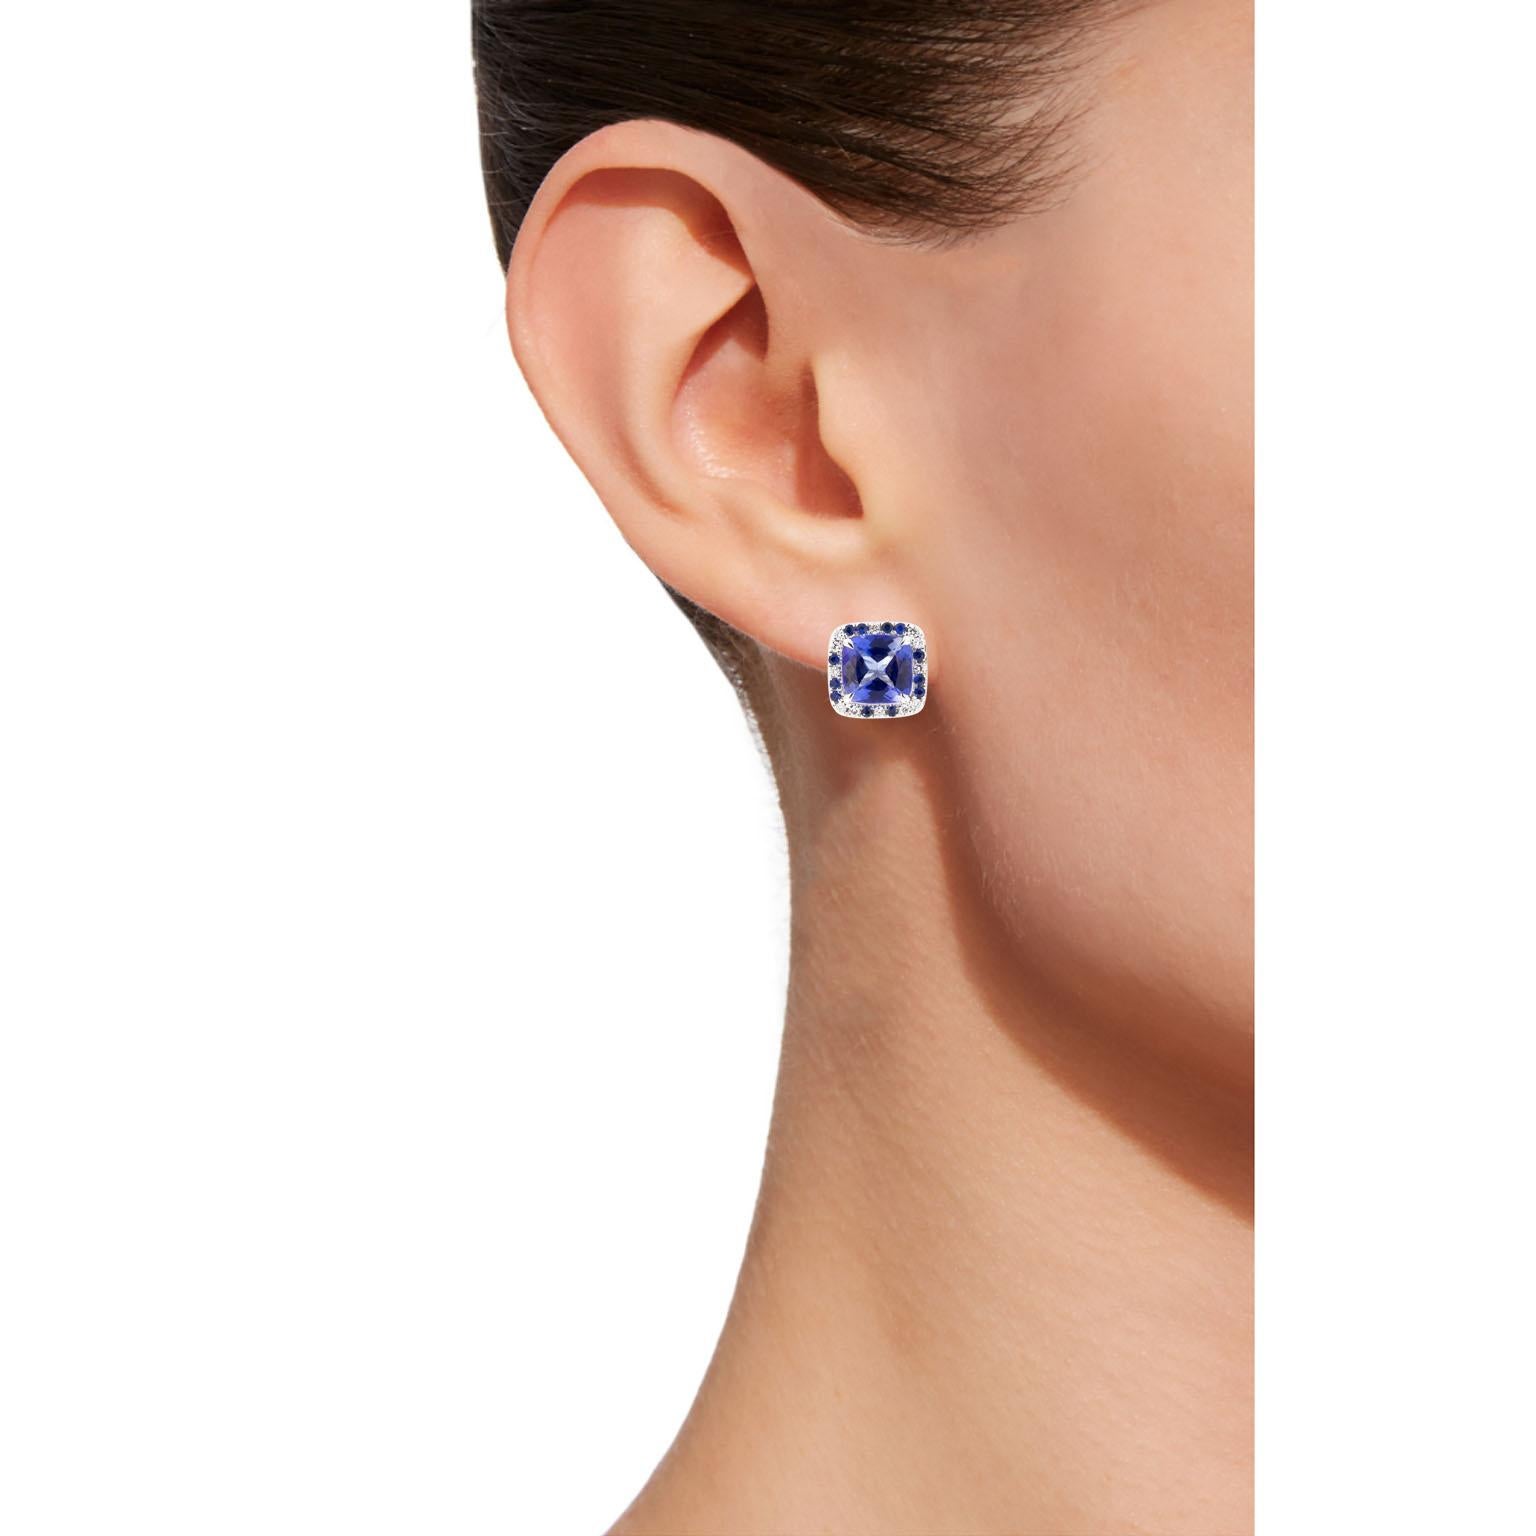 Jona design collection, hand crafted in Italy, 18 karat white gold stud earrings set with two cushion cut tanzanite weighing 2.86 carats surrounded by 0.20 carats of blu sapphires and 0.14 carats of white diamonds. Clips can be mounted upon request.